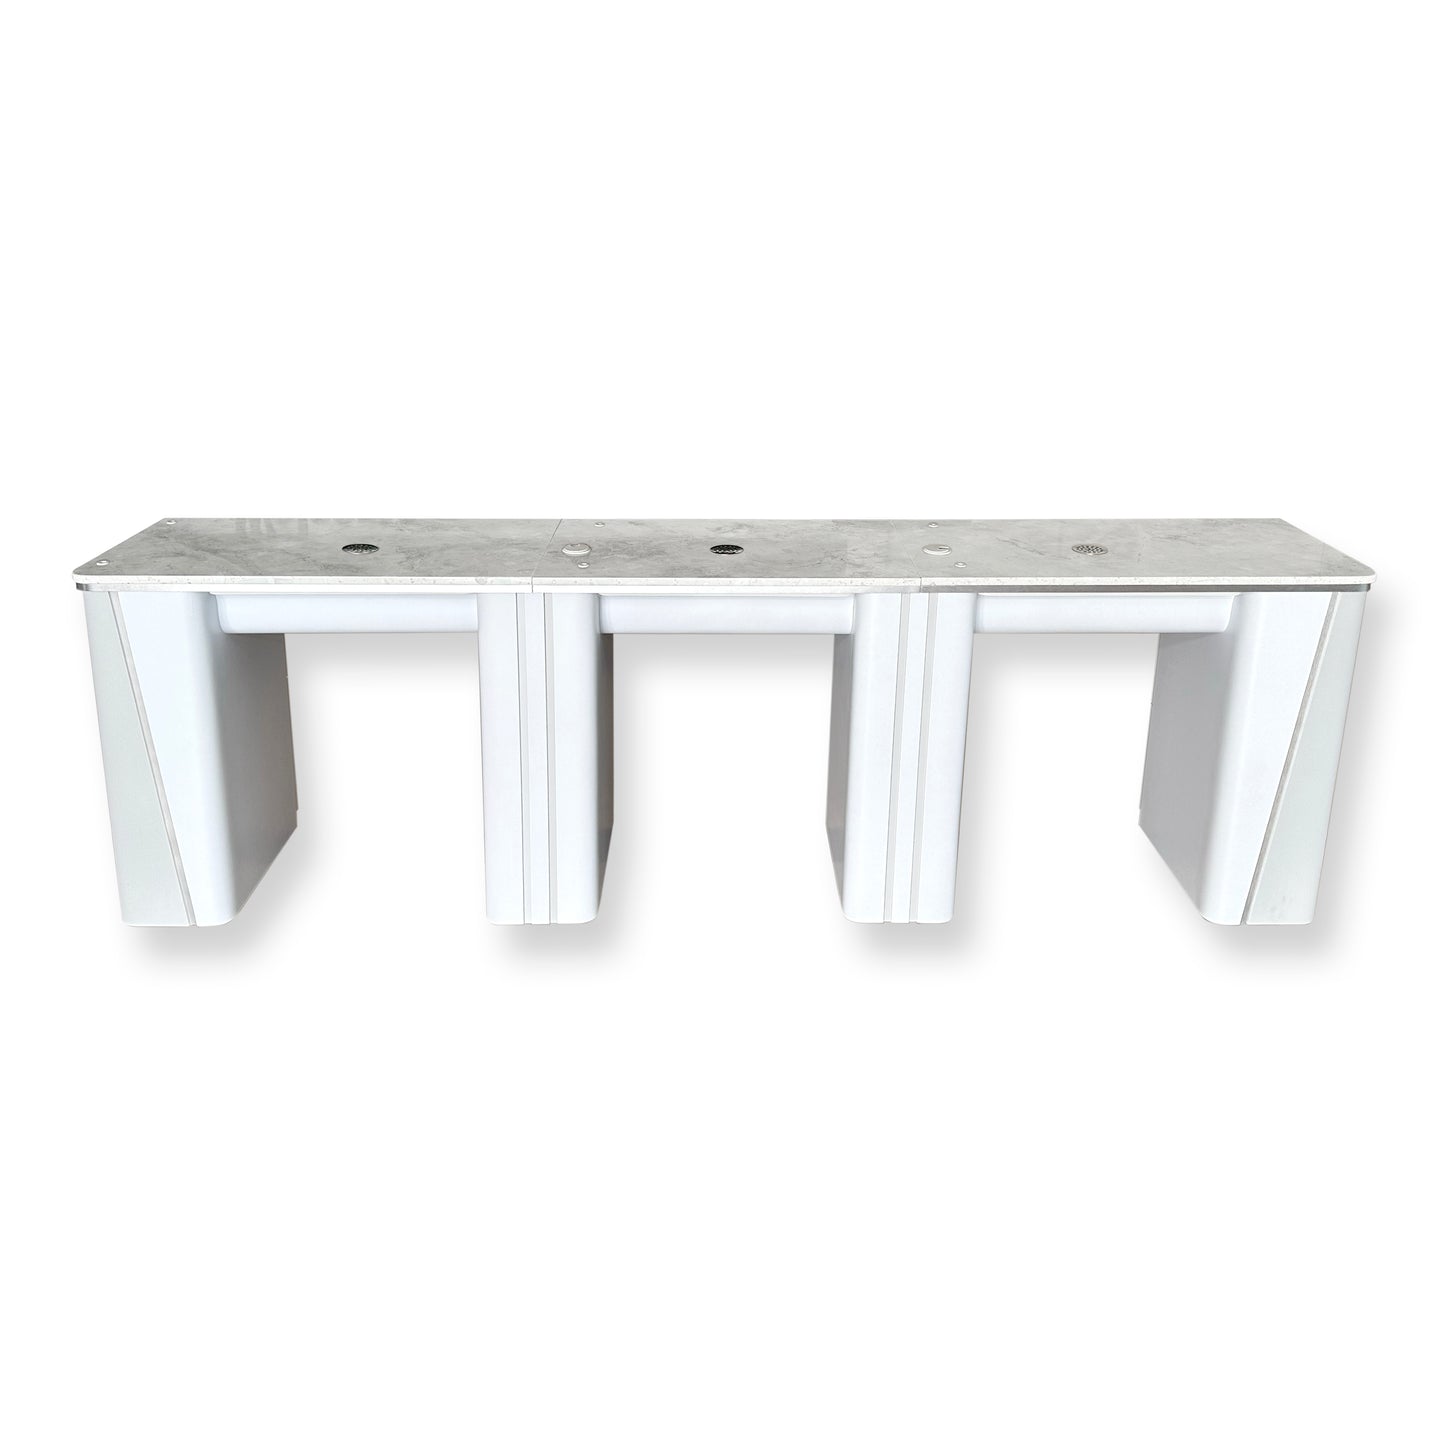 Benjamine Triple Nail table with Vent Pipe